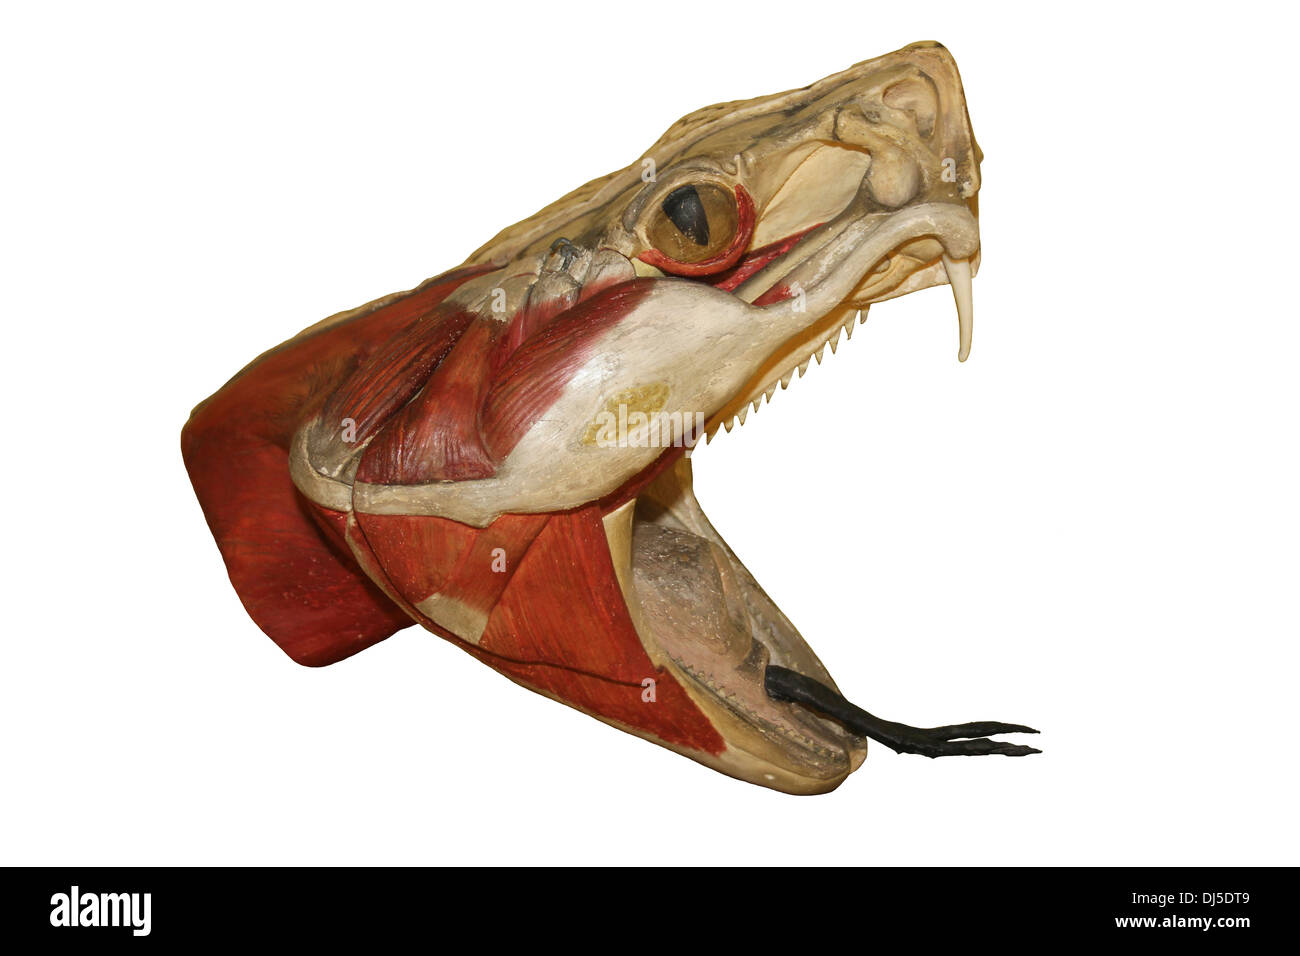 Anatomical Model Of A Snake Head Stock Photo